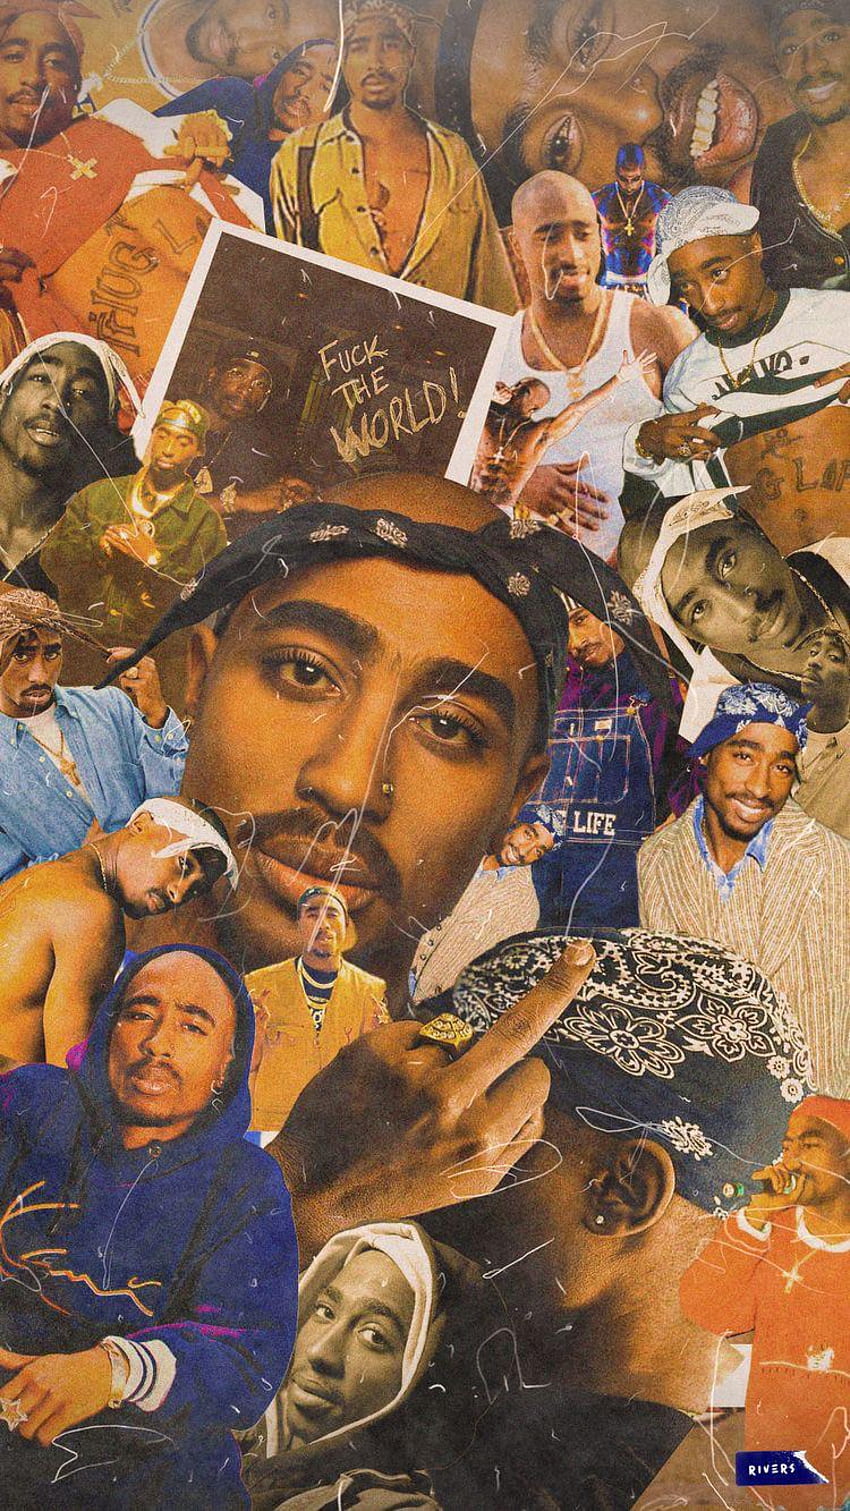 My brother found this dope of 2pac I hope you like it, Dope Tupac HD phone wallpaper